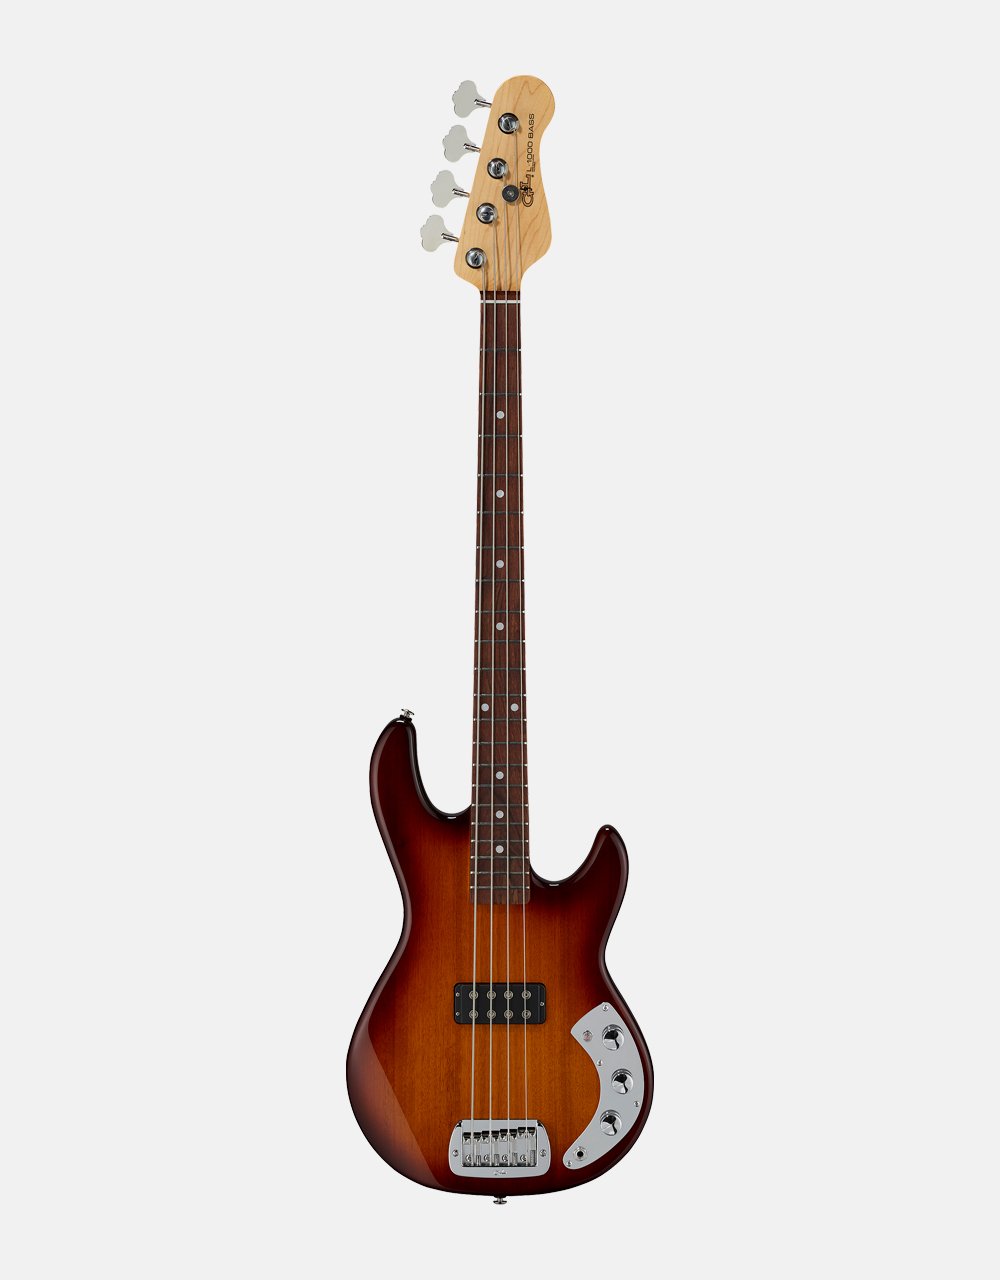 Basses USA | Product categories | G&L Musical Instruments